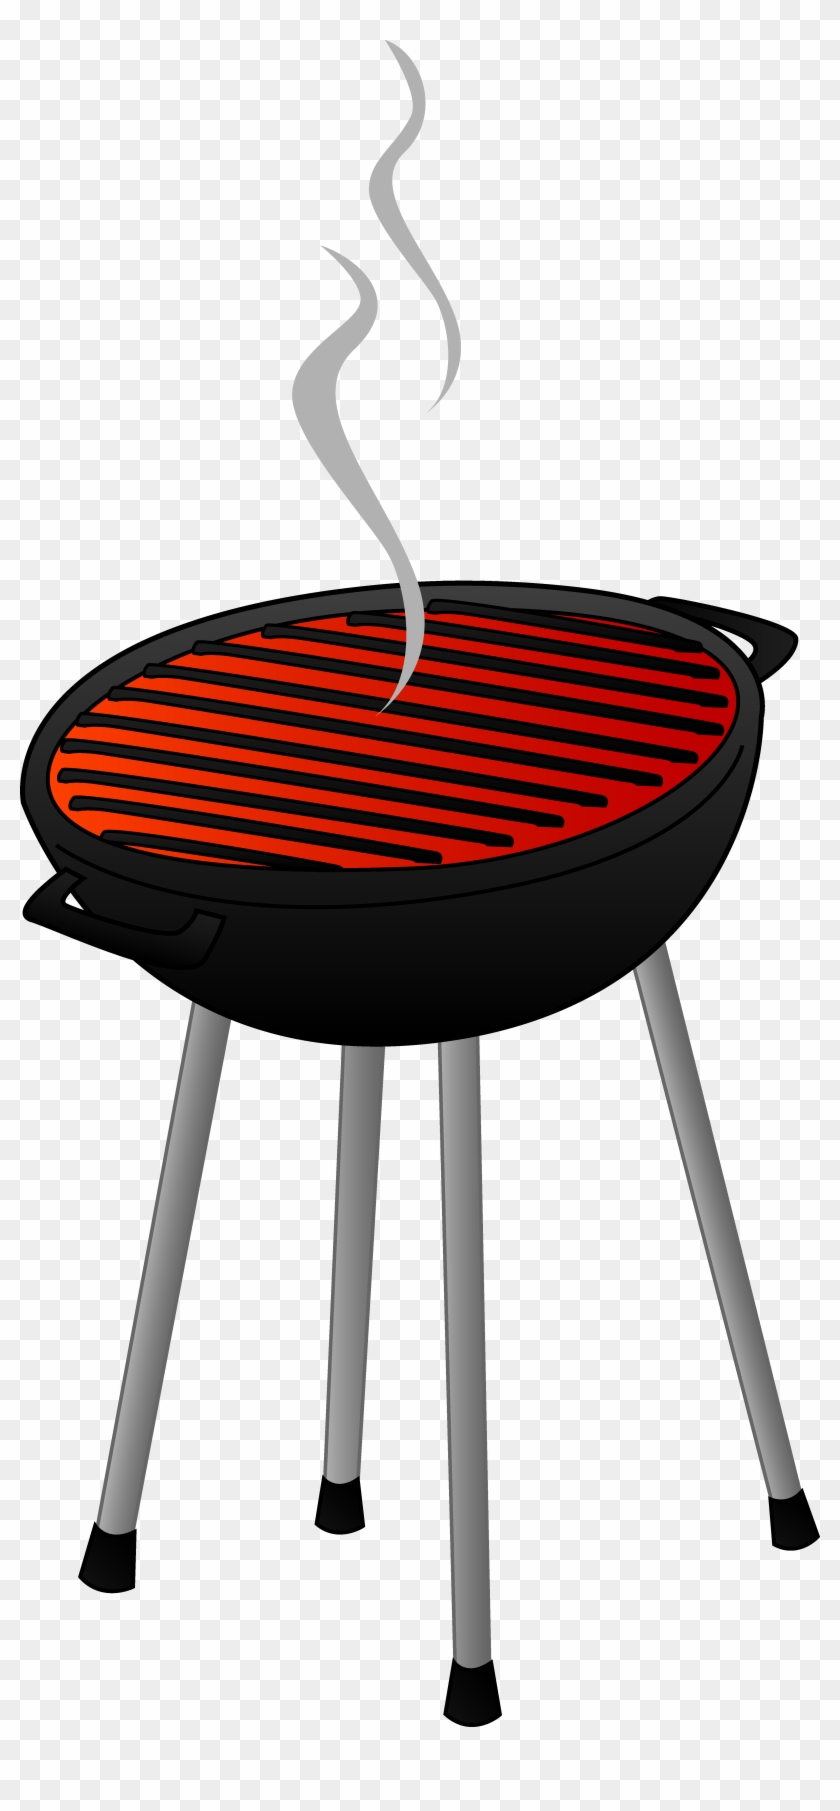 Grill Png Background Image - Grill Clipart Transparent Png #495159